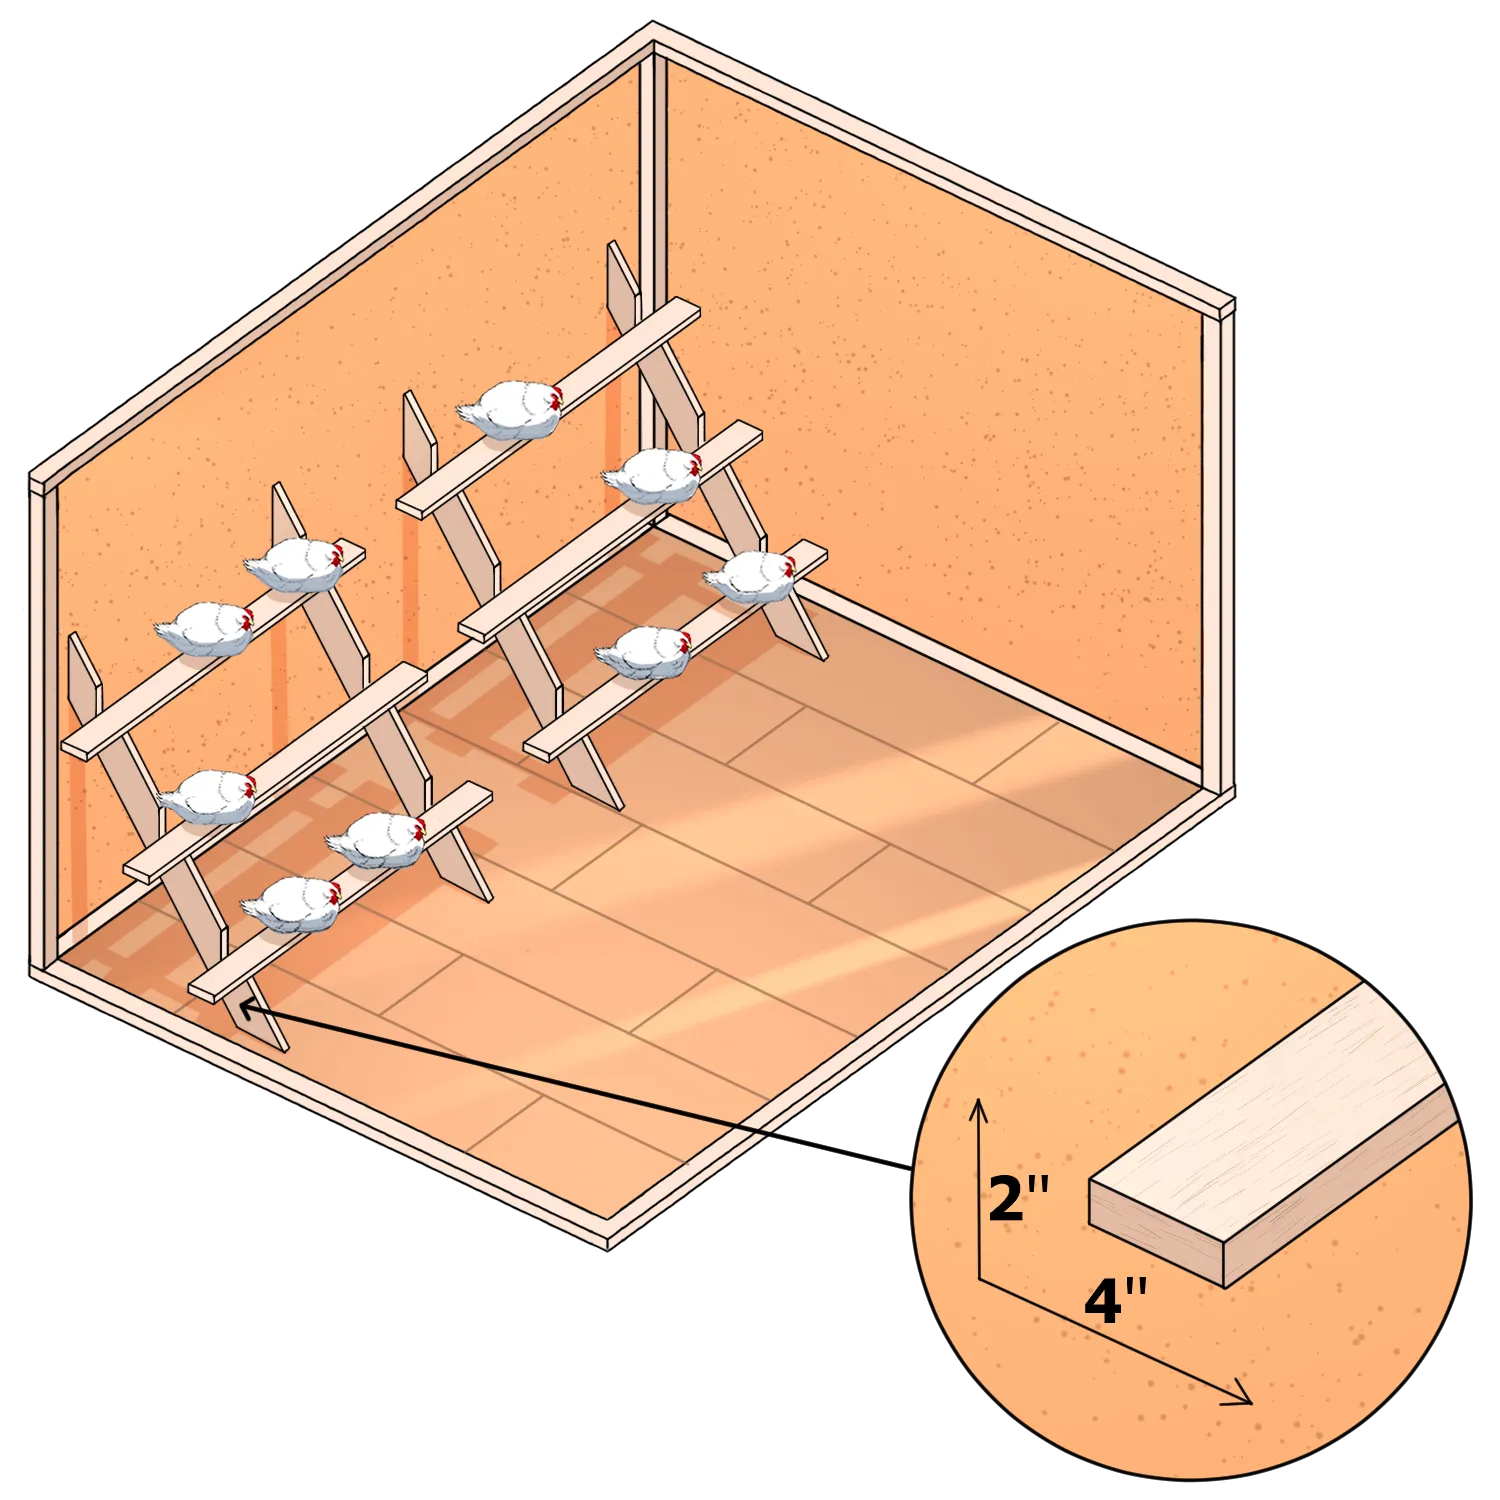 2″ x 4″ board is recommended for roosts